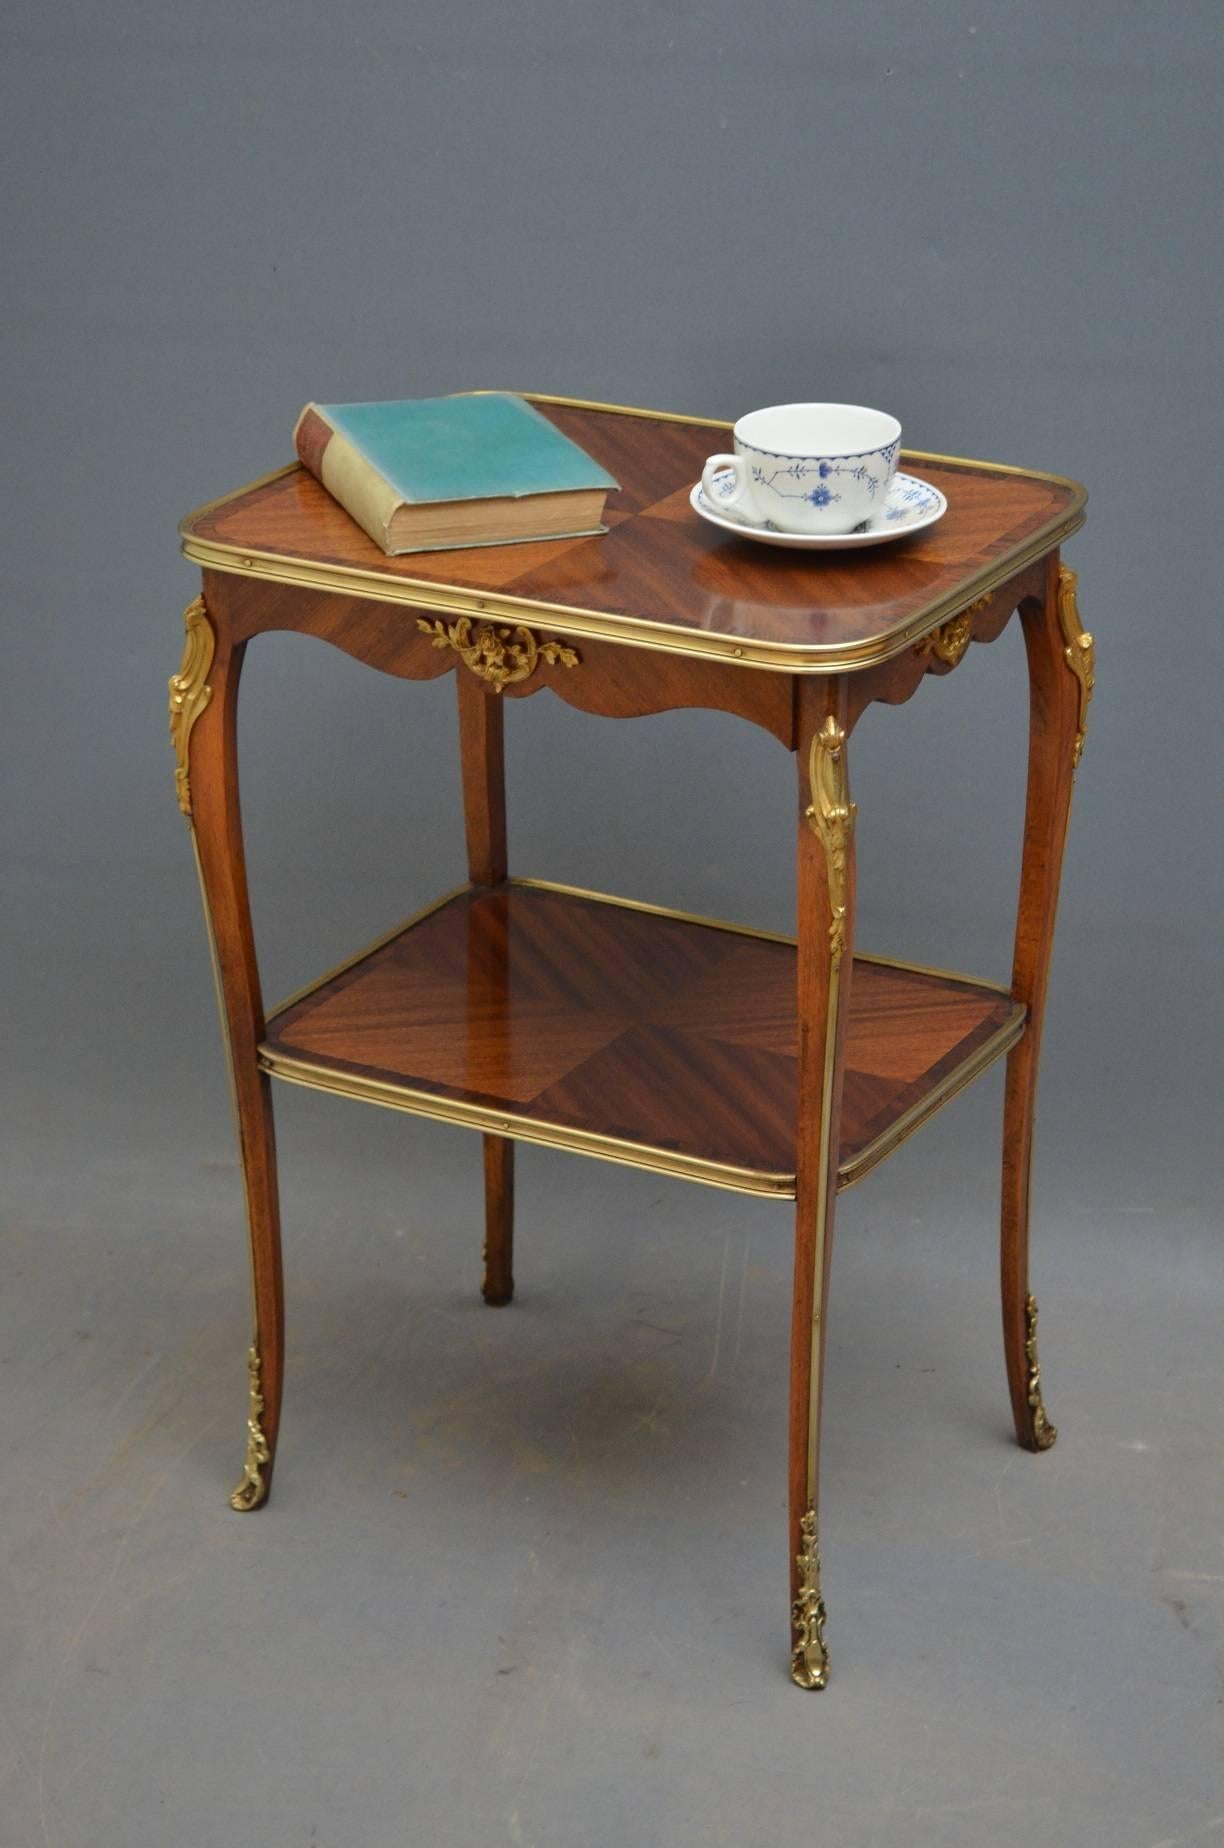 K0179 an elegant French occasional table having bookmatched quarter veneered top with rosewood crossbanding and brass edge above a small frieze drawer, all standing on slender legs united by undertier, all with fine brass decoration throughout. This